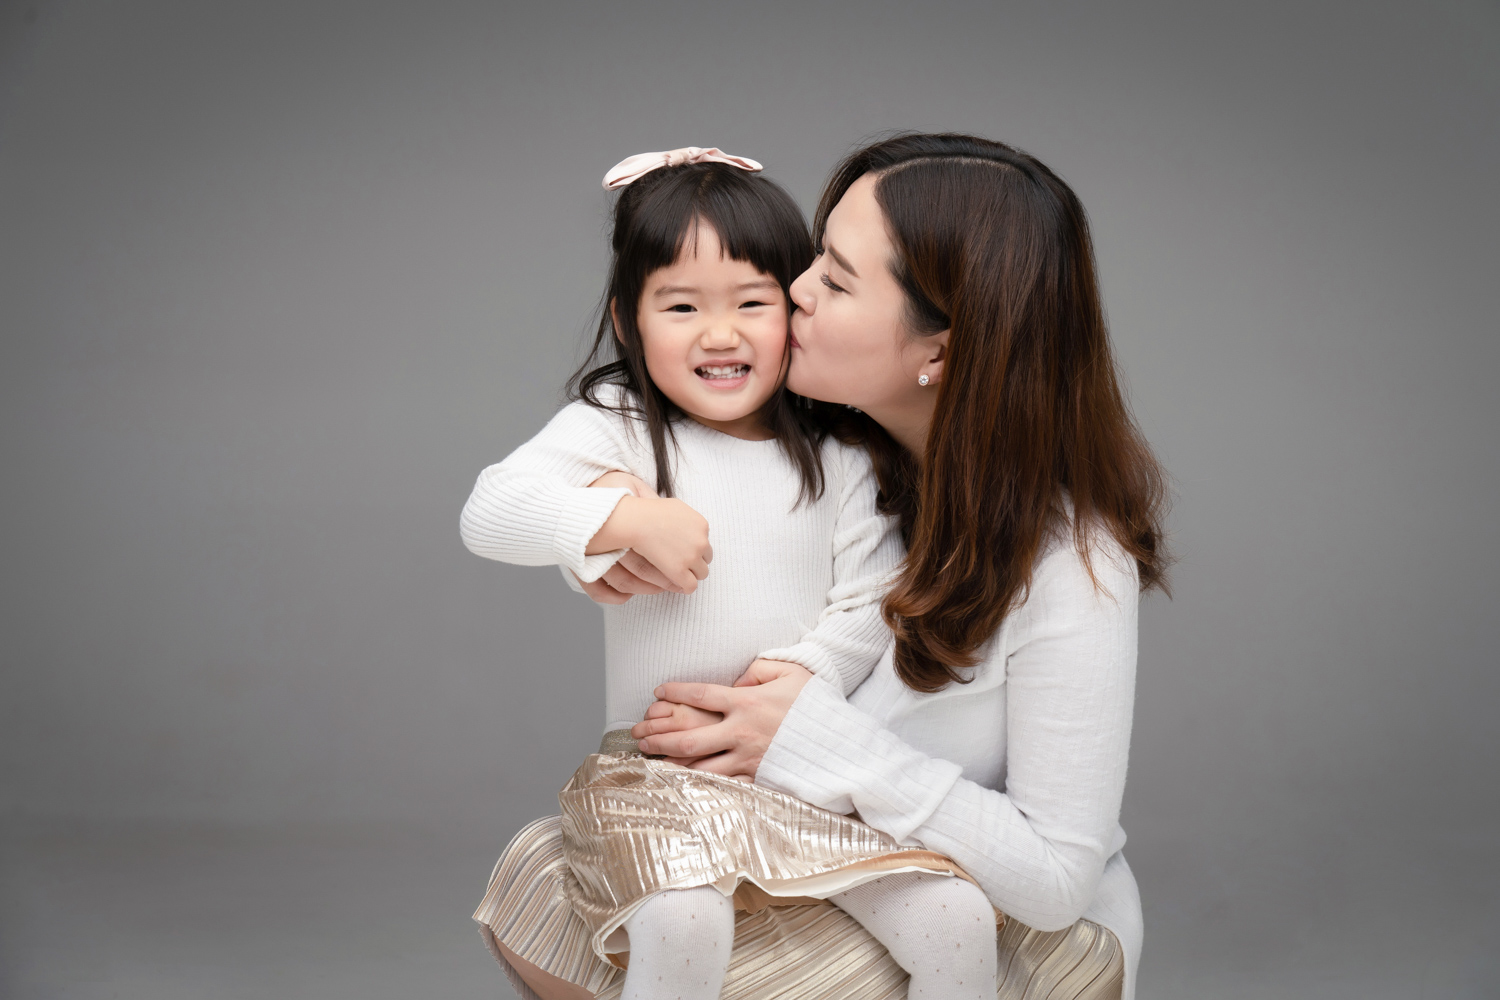 Janice kisses her daughter while holding her during a family photoshoot.